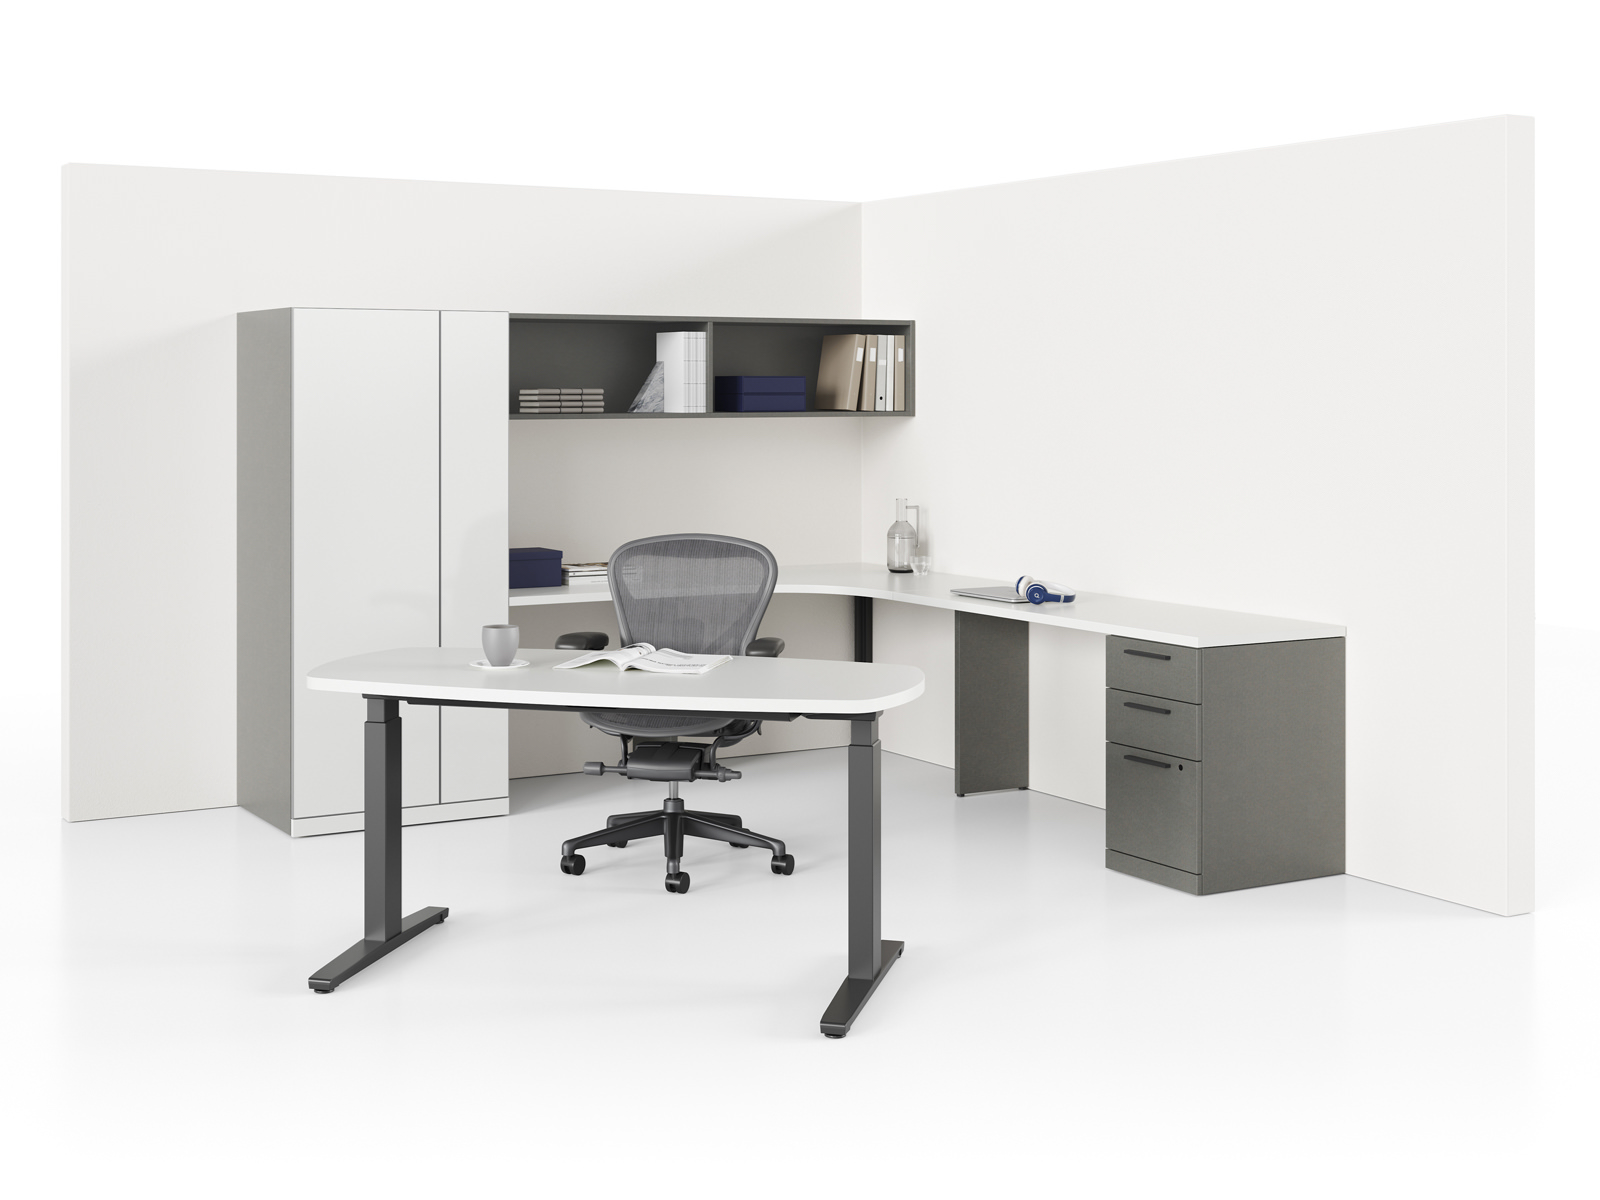 An Aeron office chair sits between a Renew Sit-to-Stand Table in the foreground and an L-shaped Canvas Private Office configuration along the back walls.